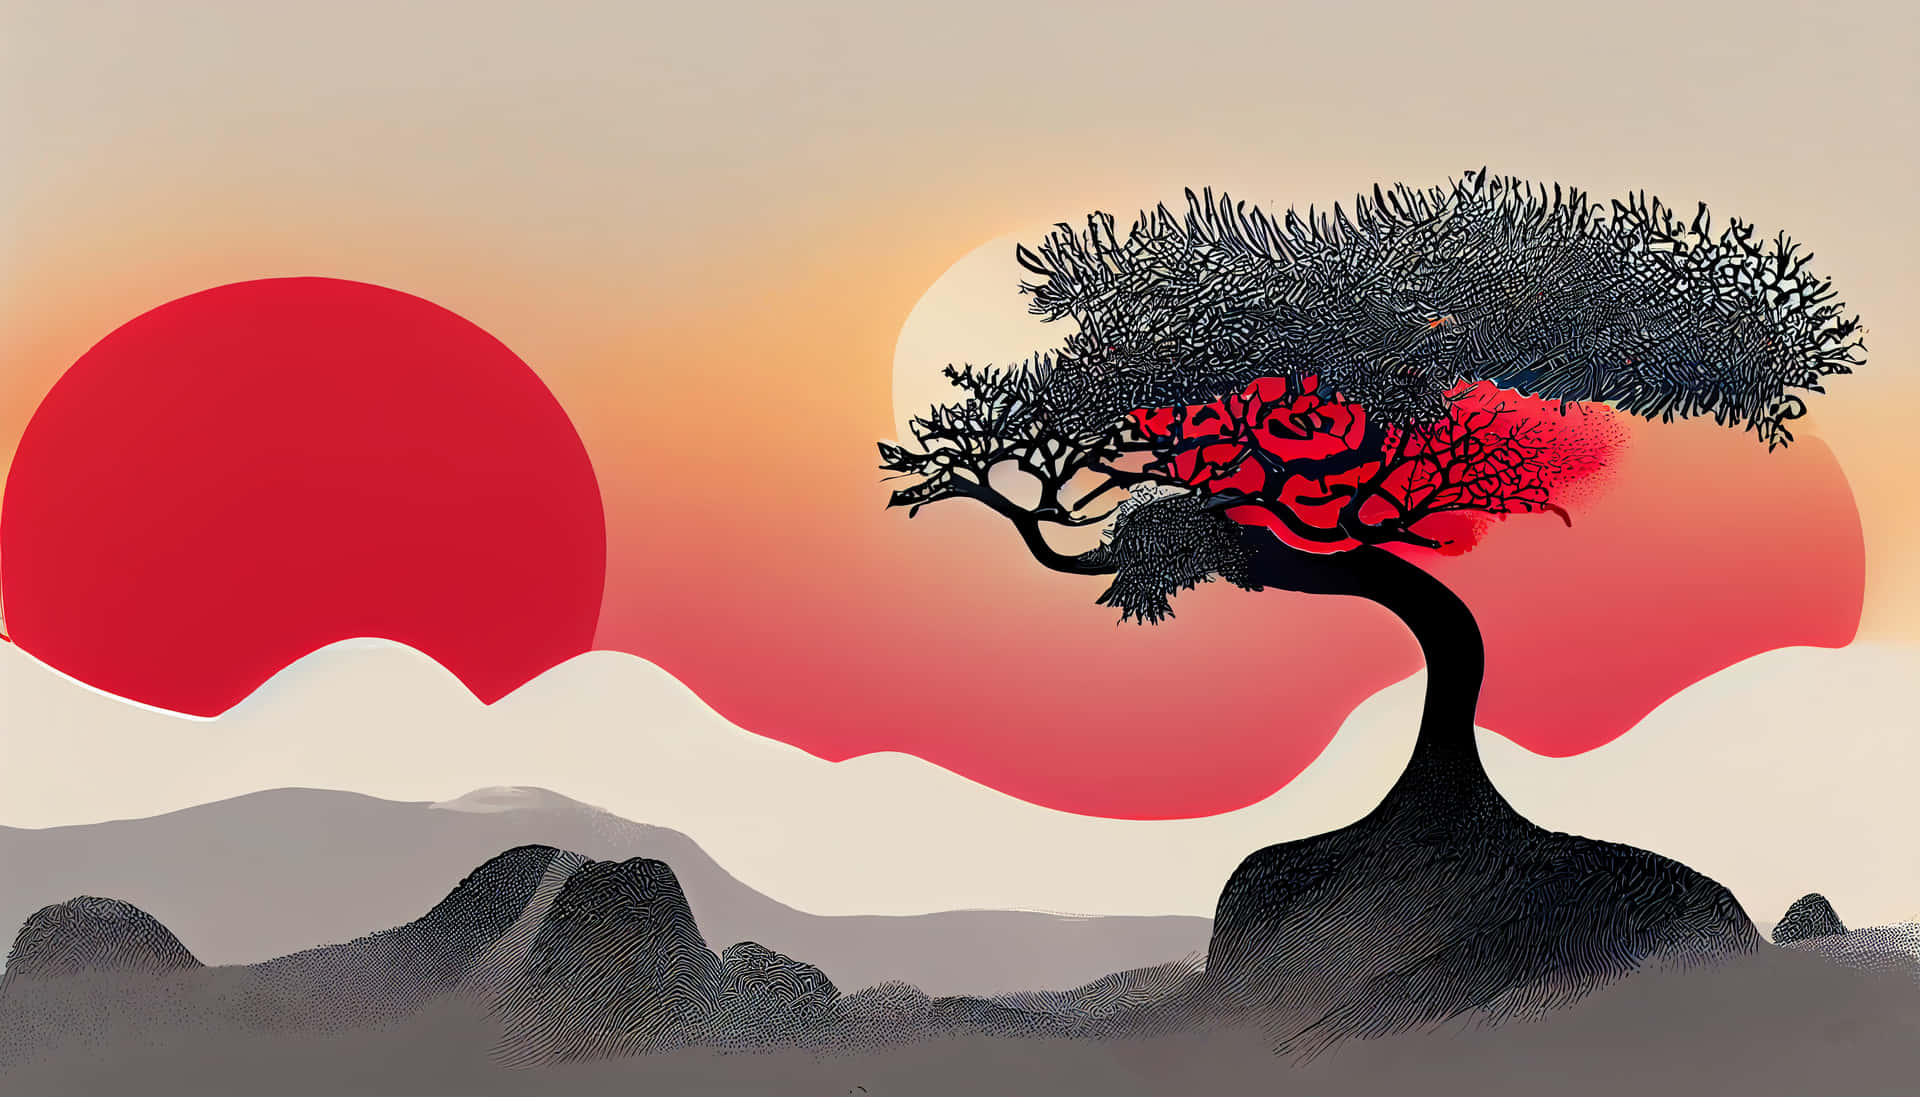 A magnificent Japanese tree glows in the sunlight Wallpaper